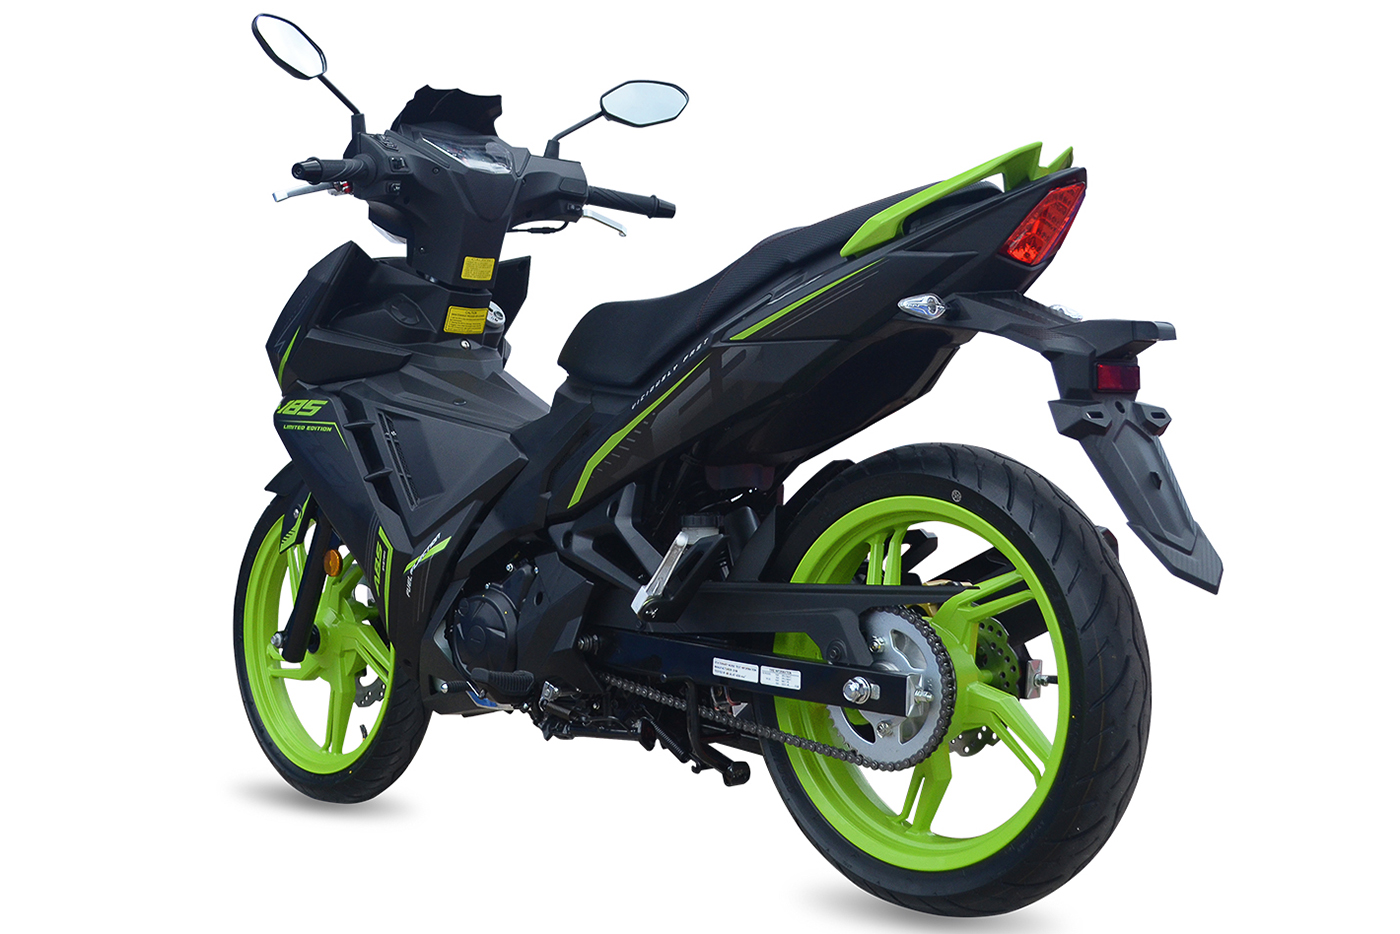 2020-sym-vf3i-limited-edition-le-launch-price-malaysia-185cc-super-moped-6.jpg